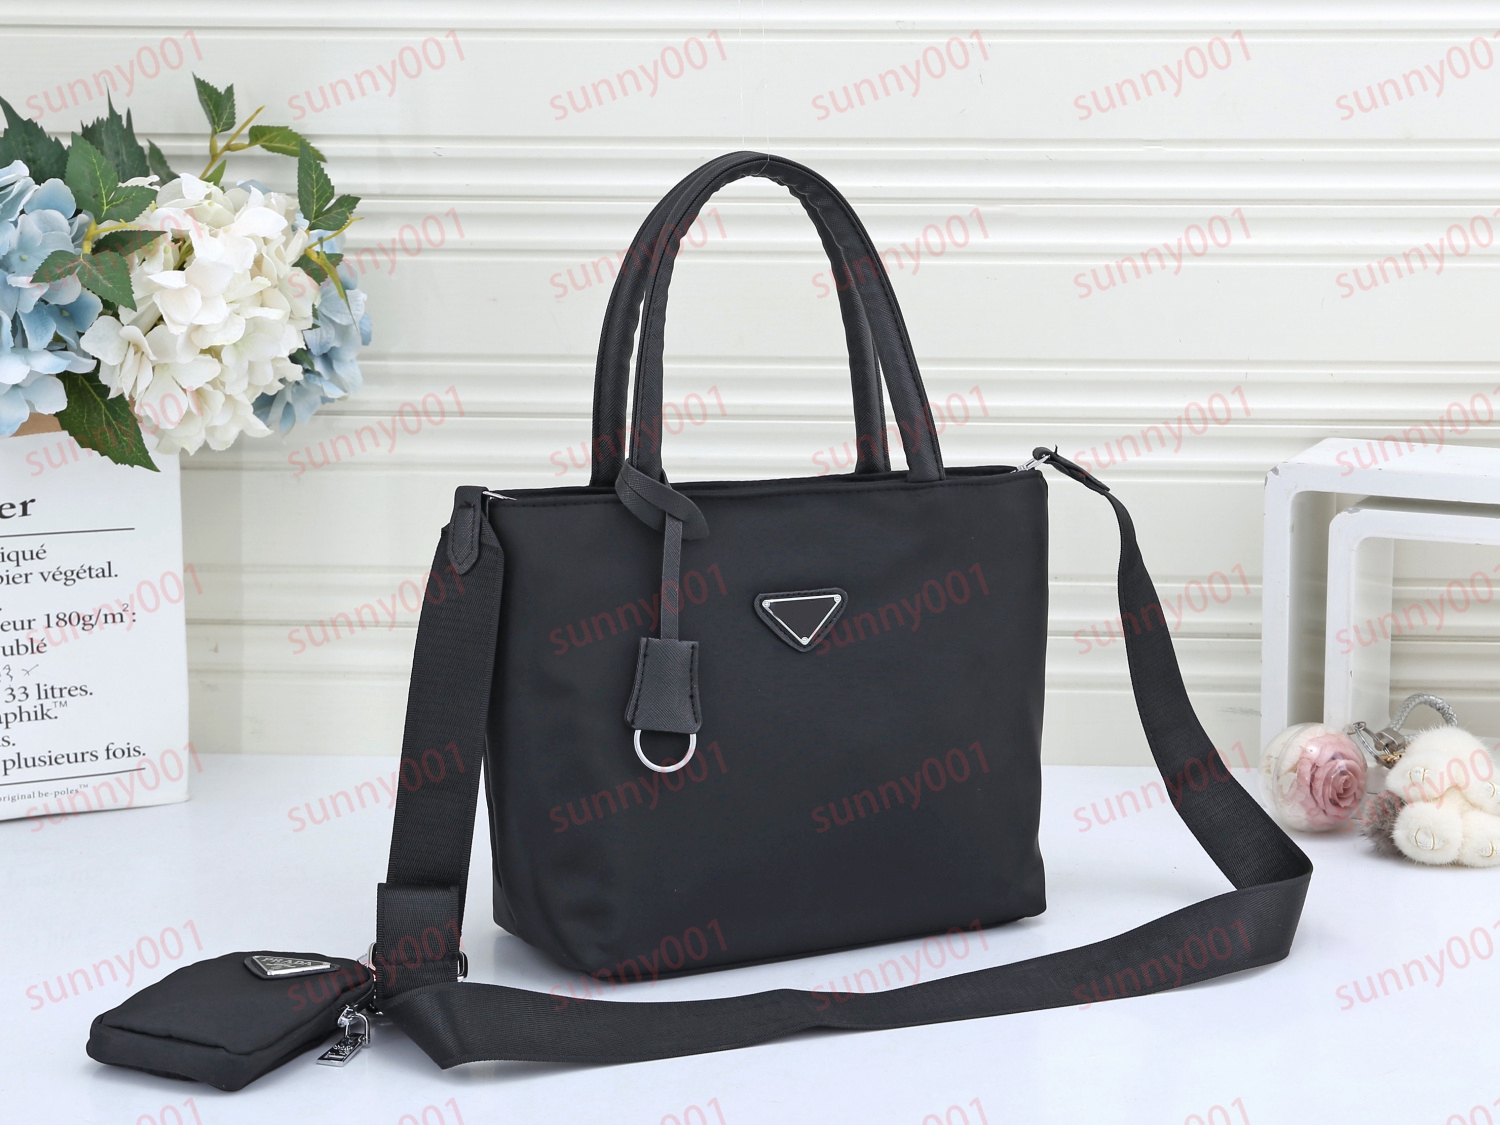 Handbag Shoulder Bag The Tote Bag Luxury Mother And Child Package Briefcase Laptop Bags Computer Package Famous Designer Practical Totes